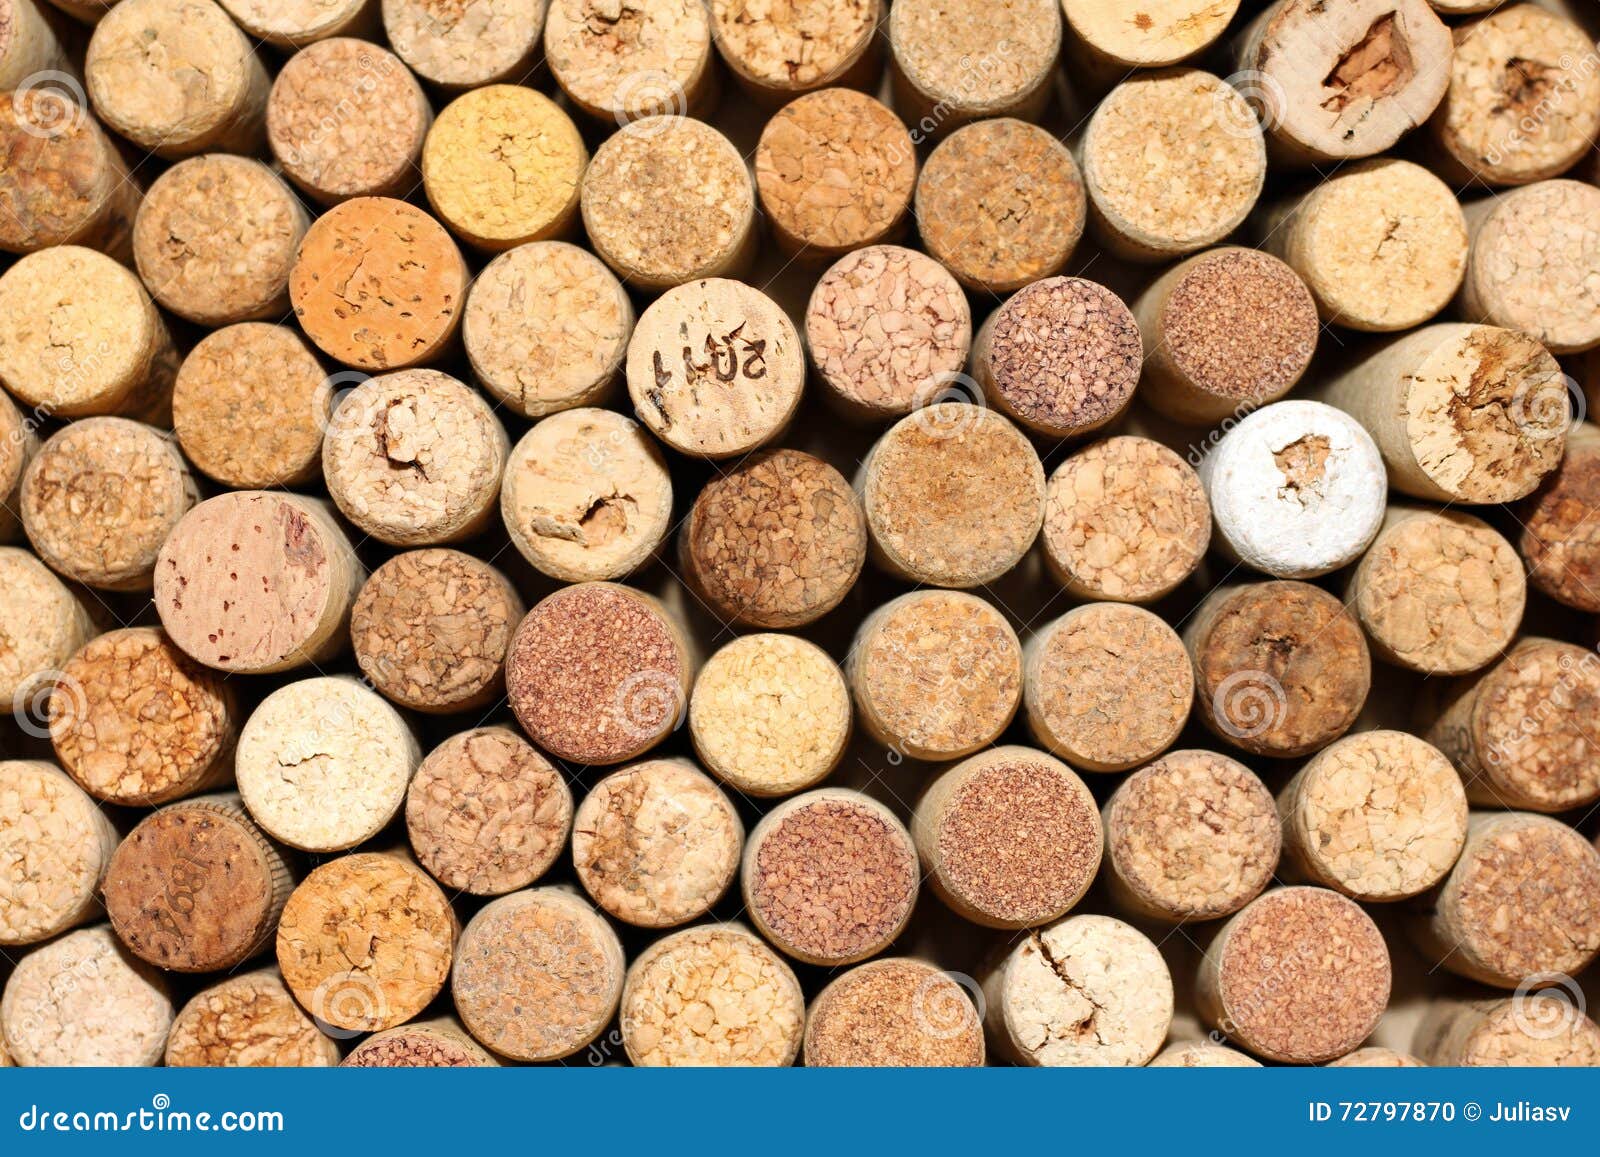 Background of Used Wine Corks, Wall of Many Different Wine Corks ...